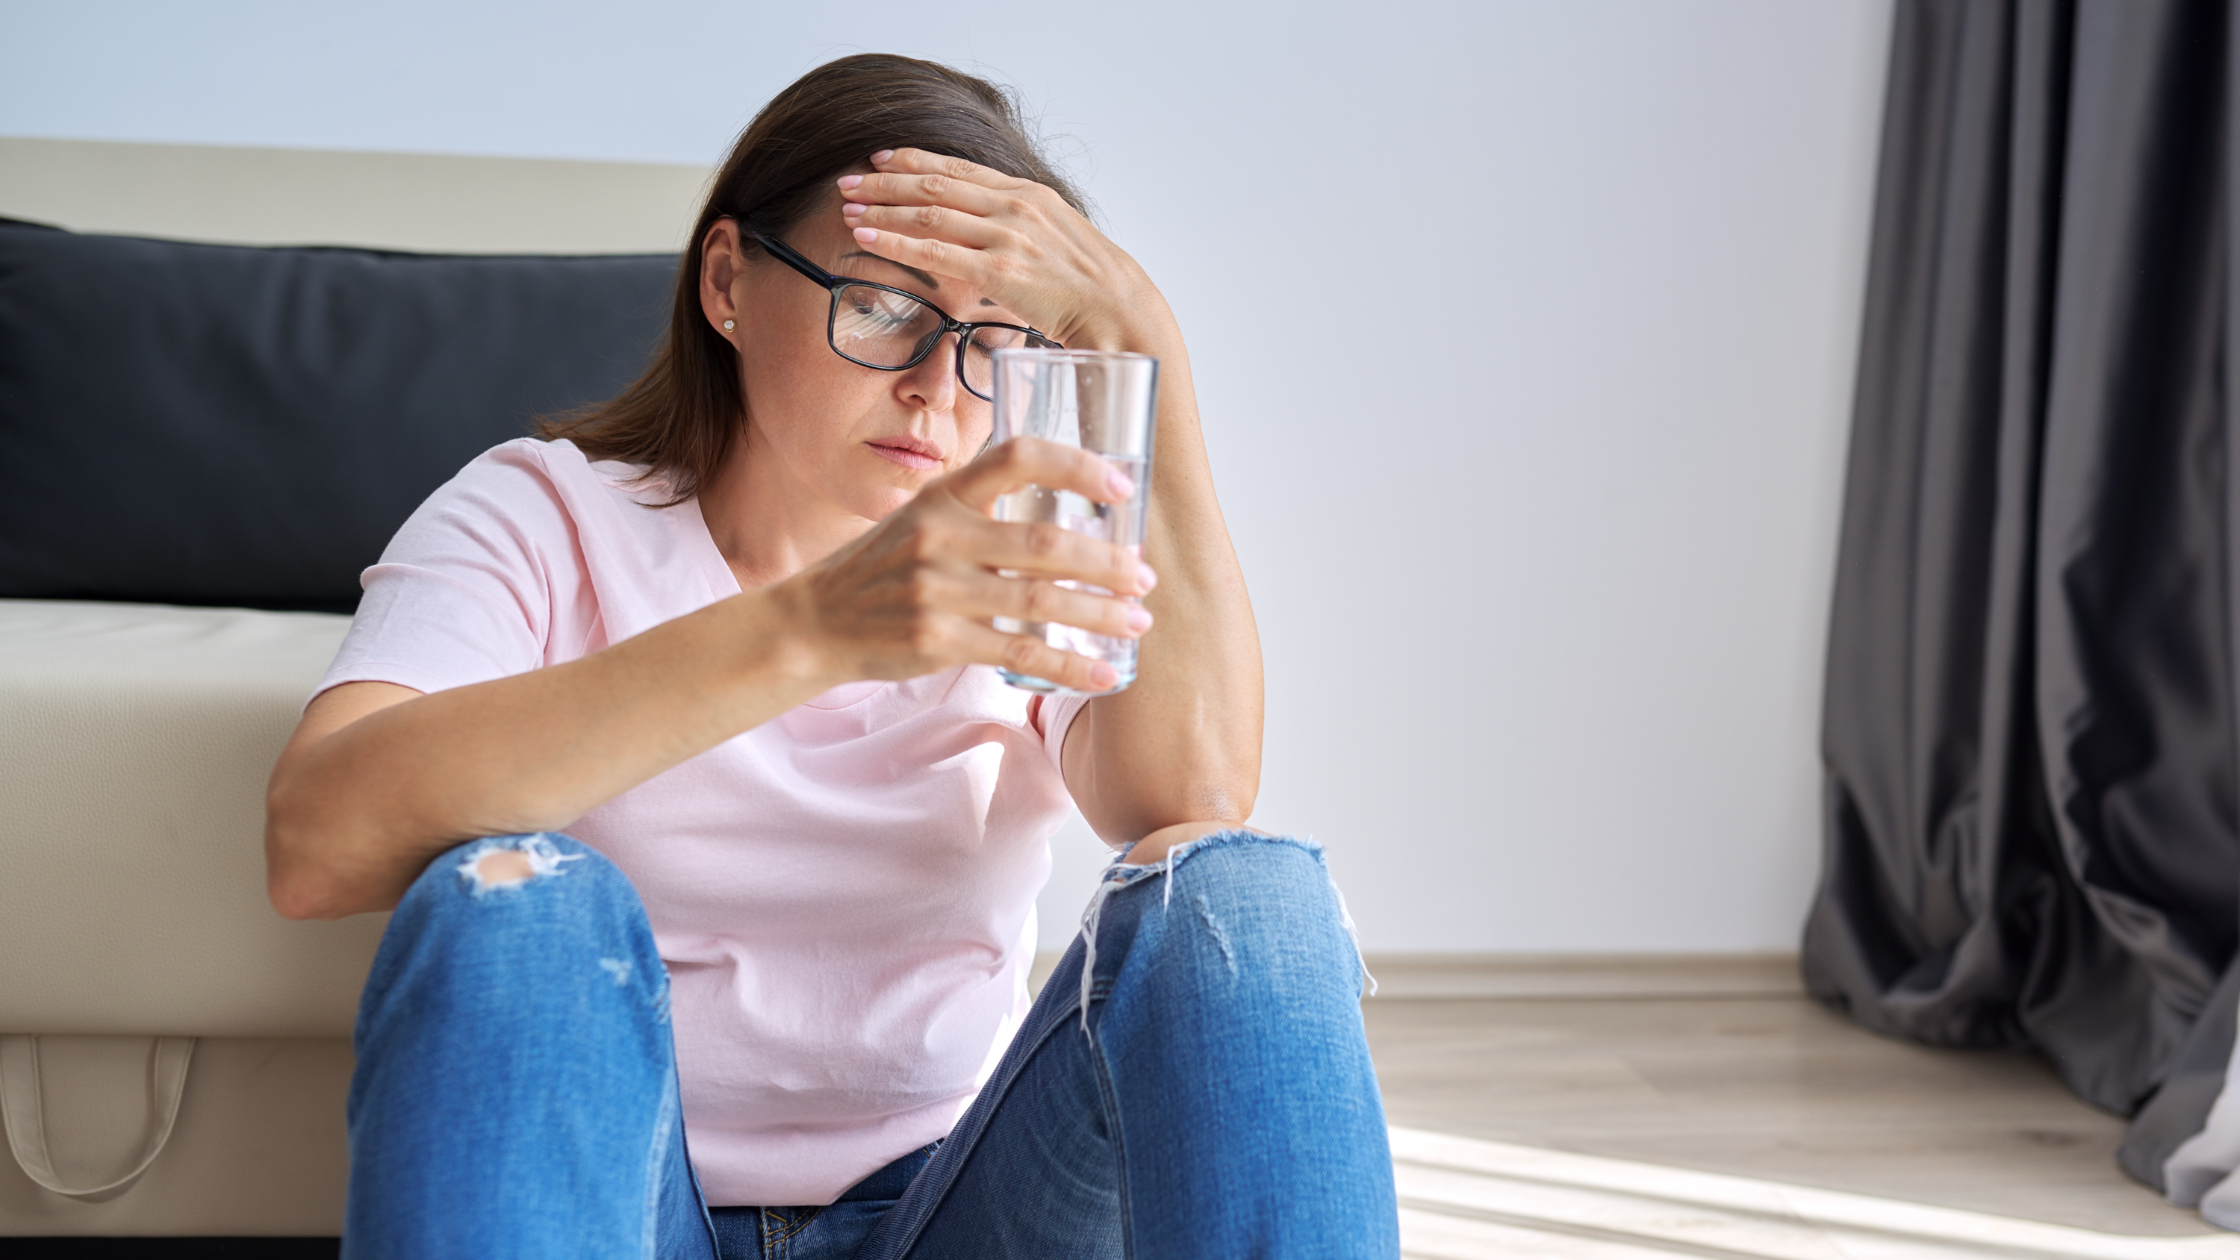 woman sits on the floor with a glass of water and her hand on her forehead